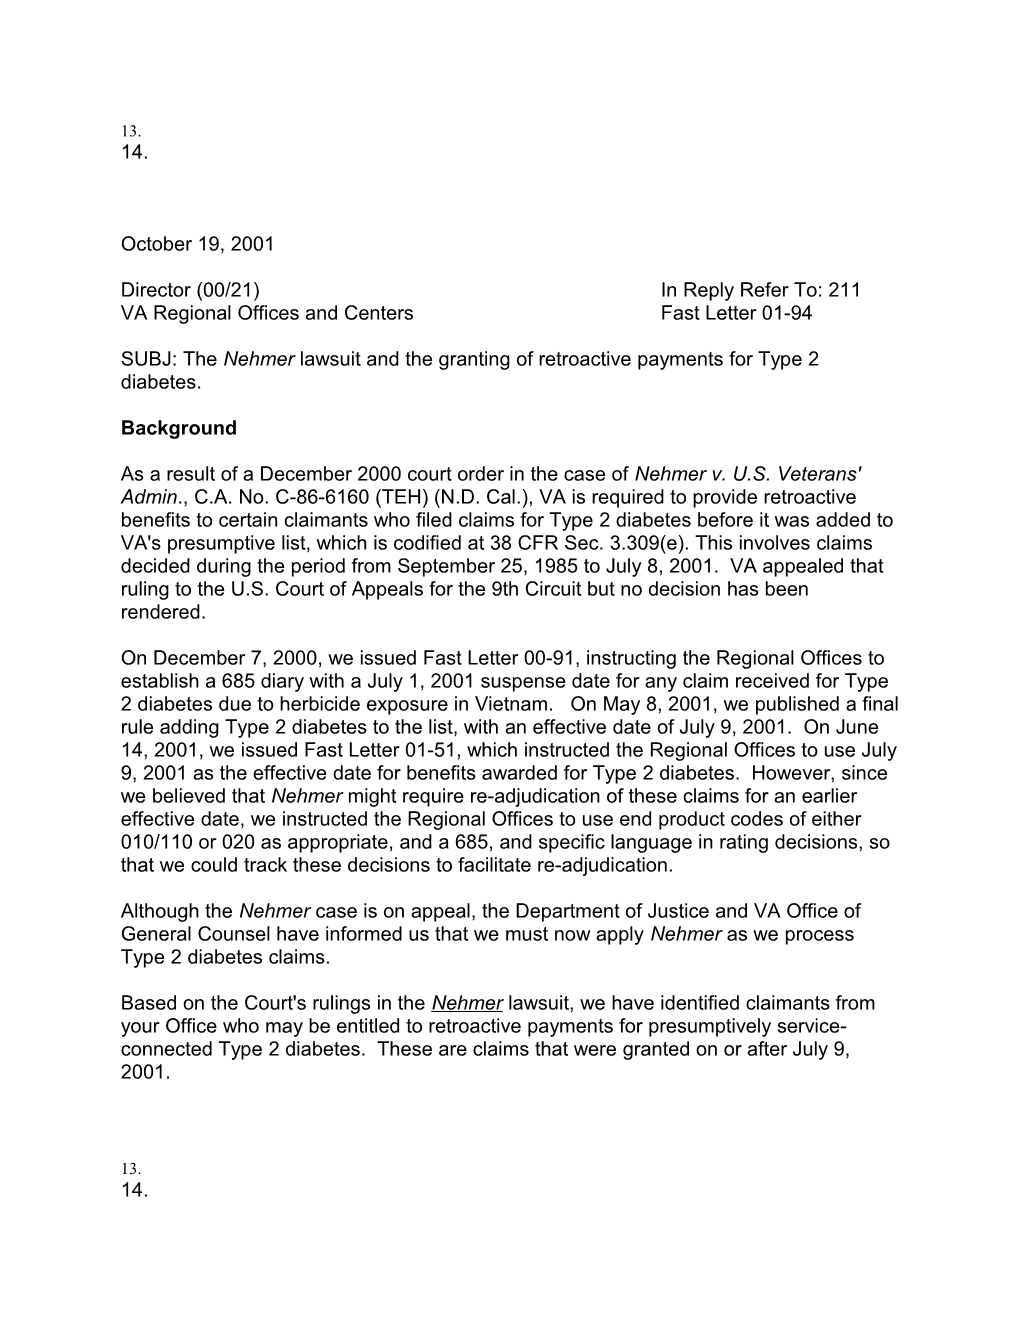 VA Regional Offices and Centersfast Letter 01-94